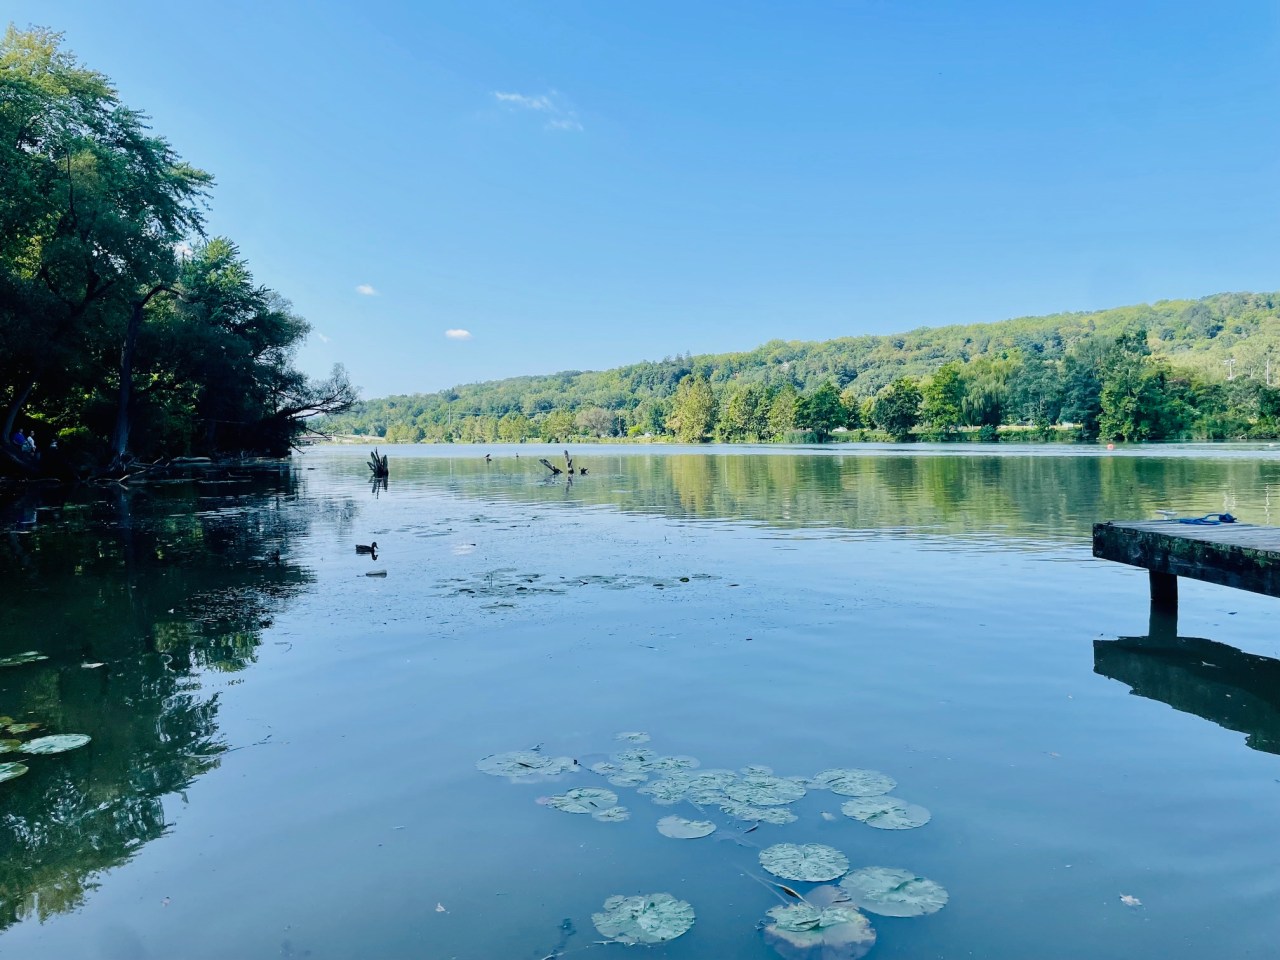 The Budgetlist: Come Along As We Enjoy An Affordable Weekend Getaway To The Finger Lakes In New York